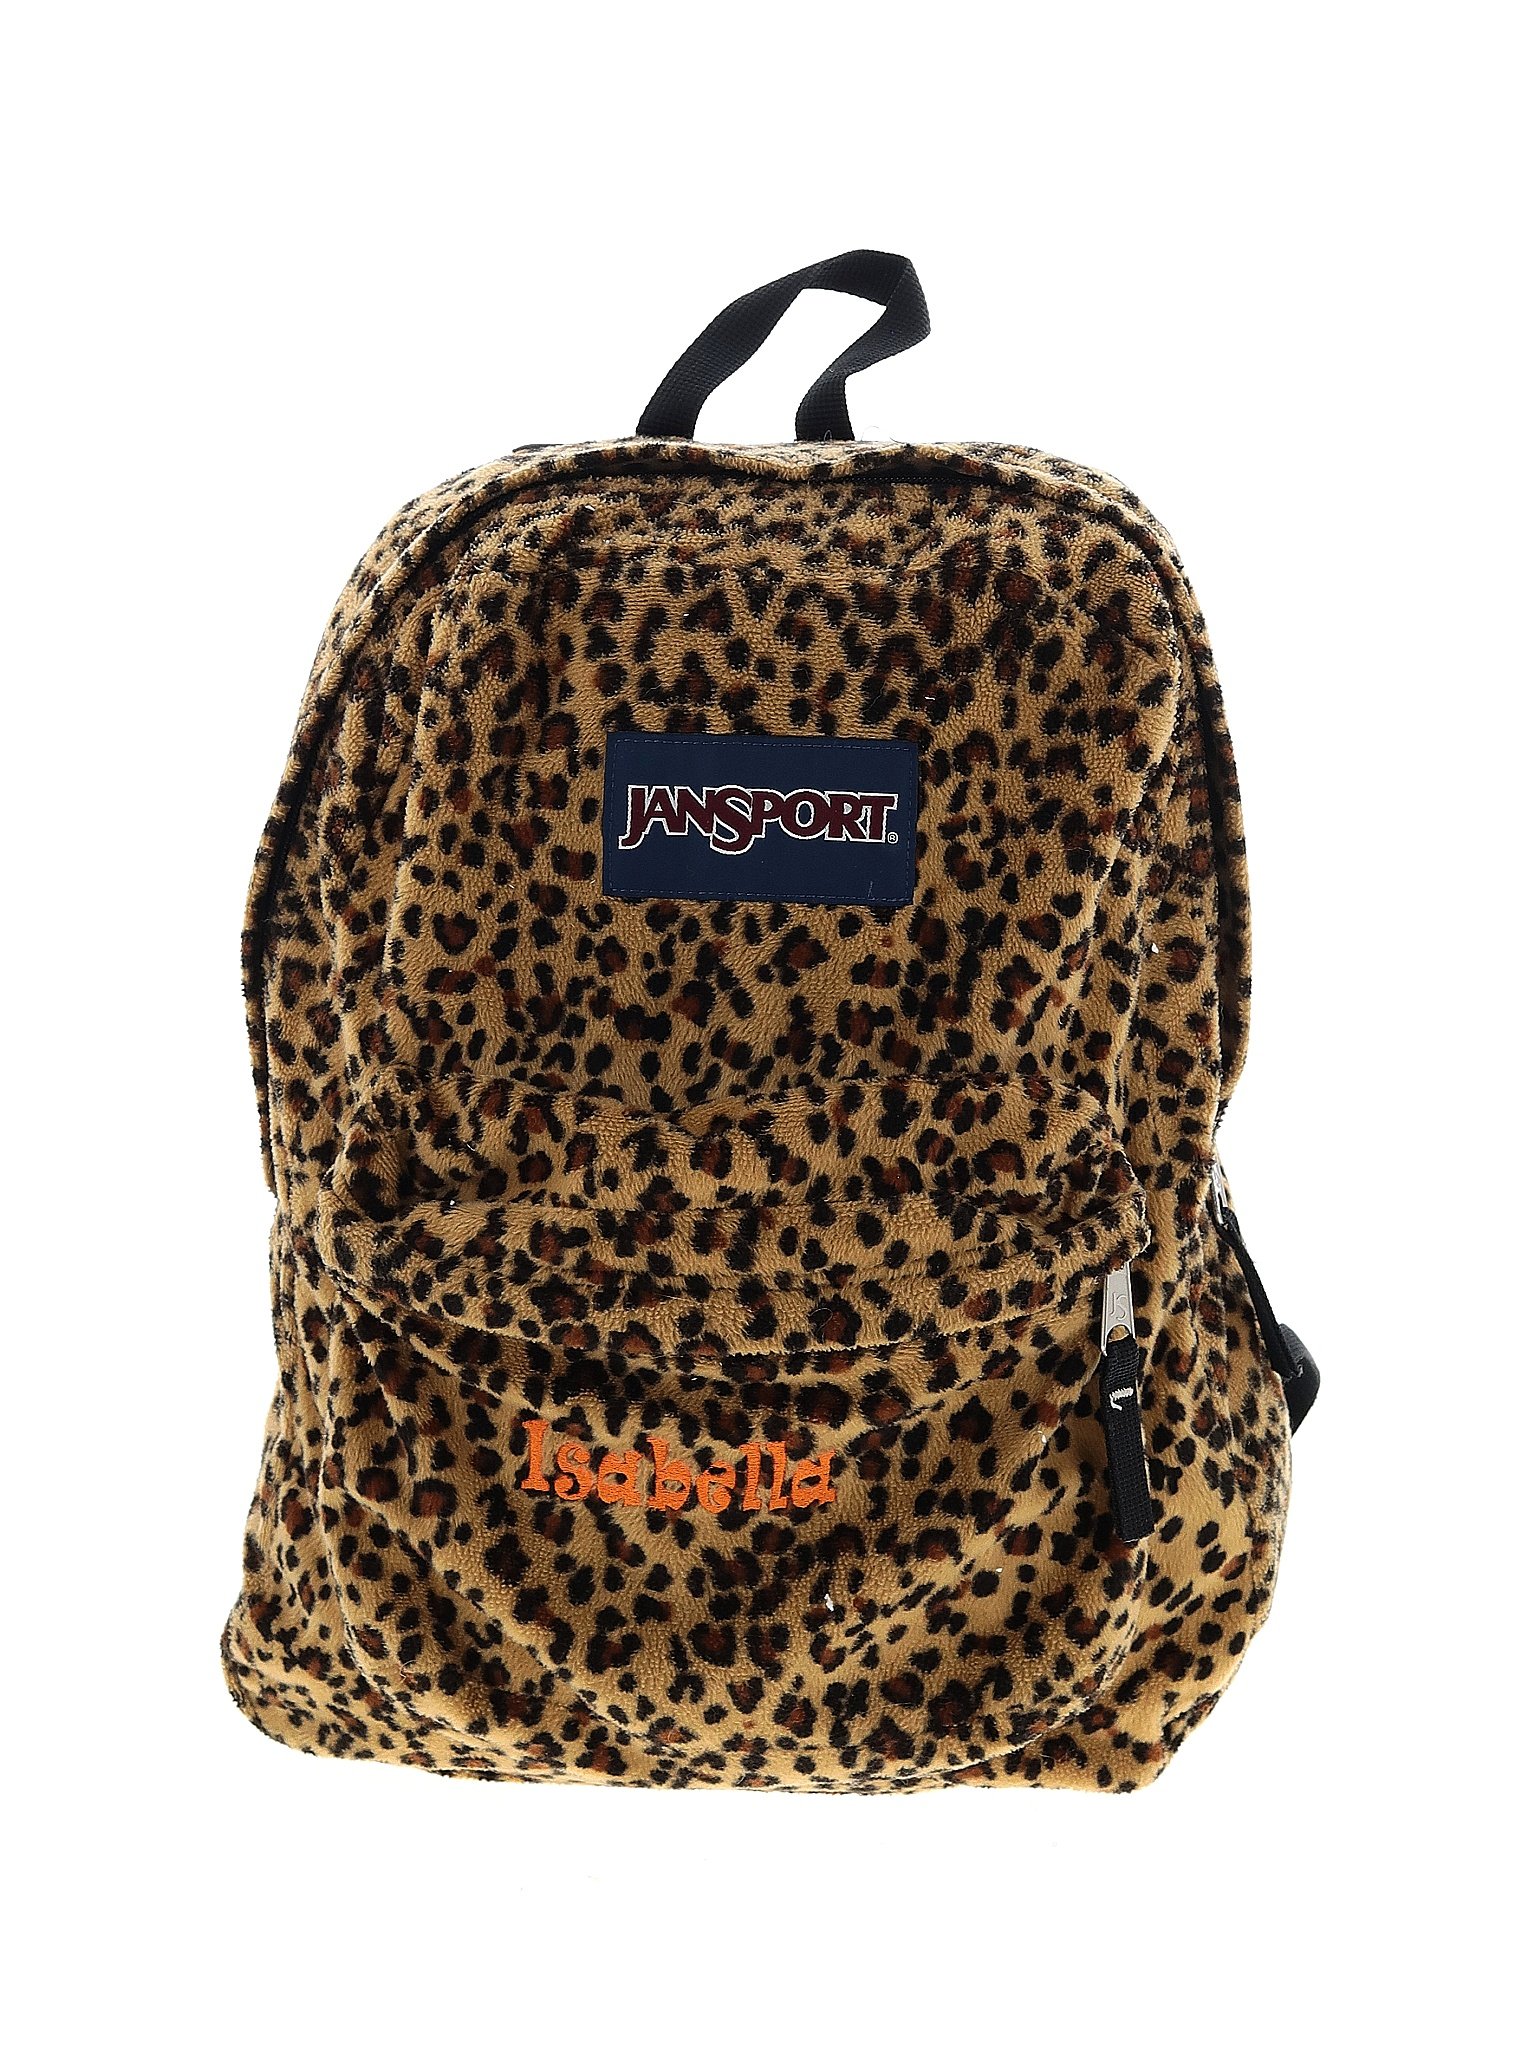 Jansport Animal Print Graphic Leopard Print Colored Tan Backpack One Size -  36% off